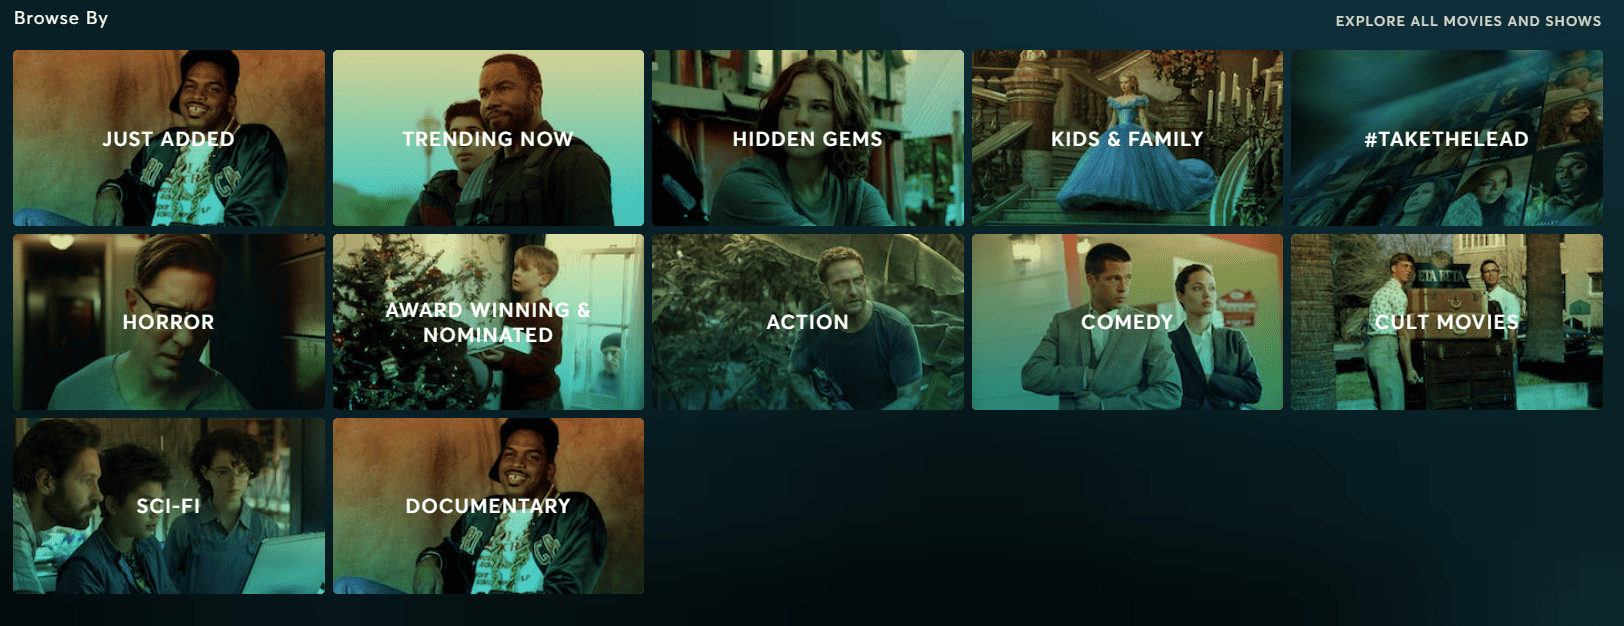 A screenshot of different movie and show options on STARZ